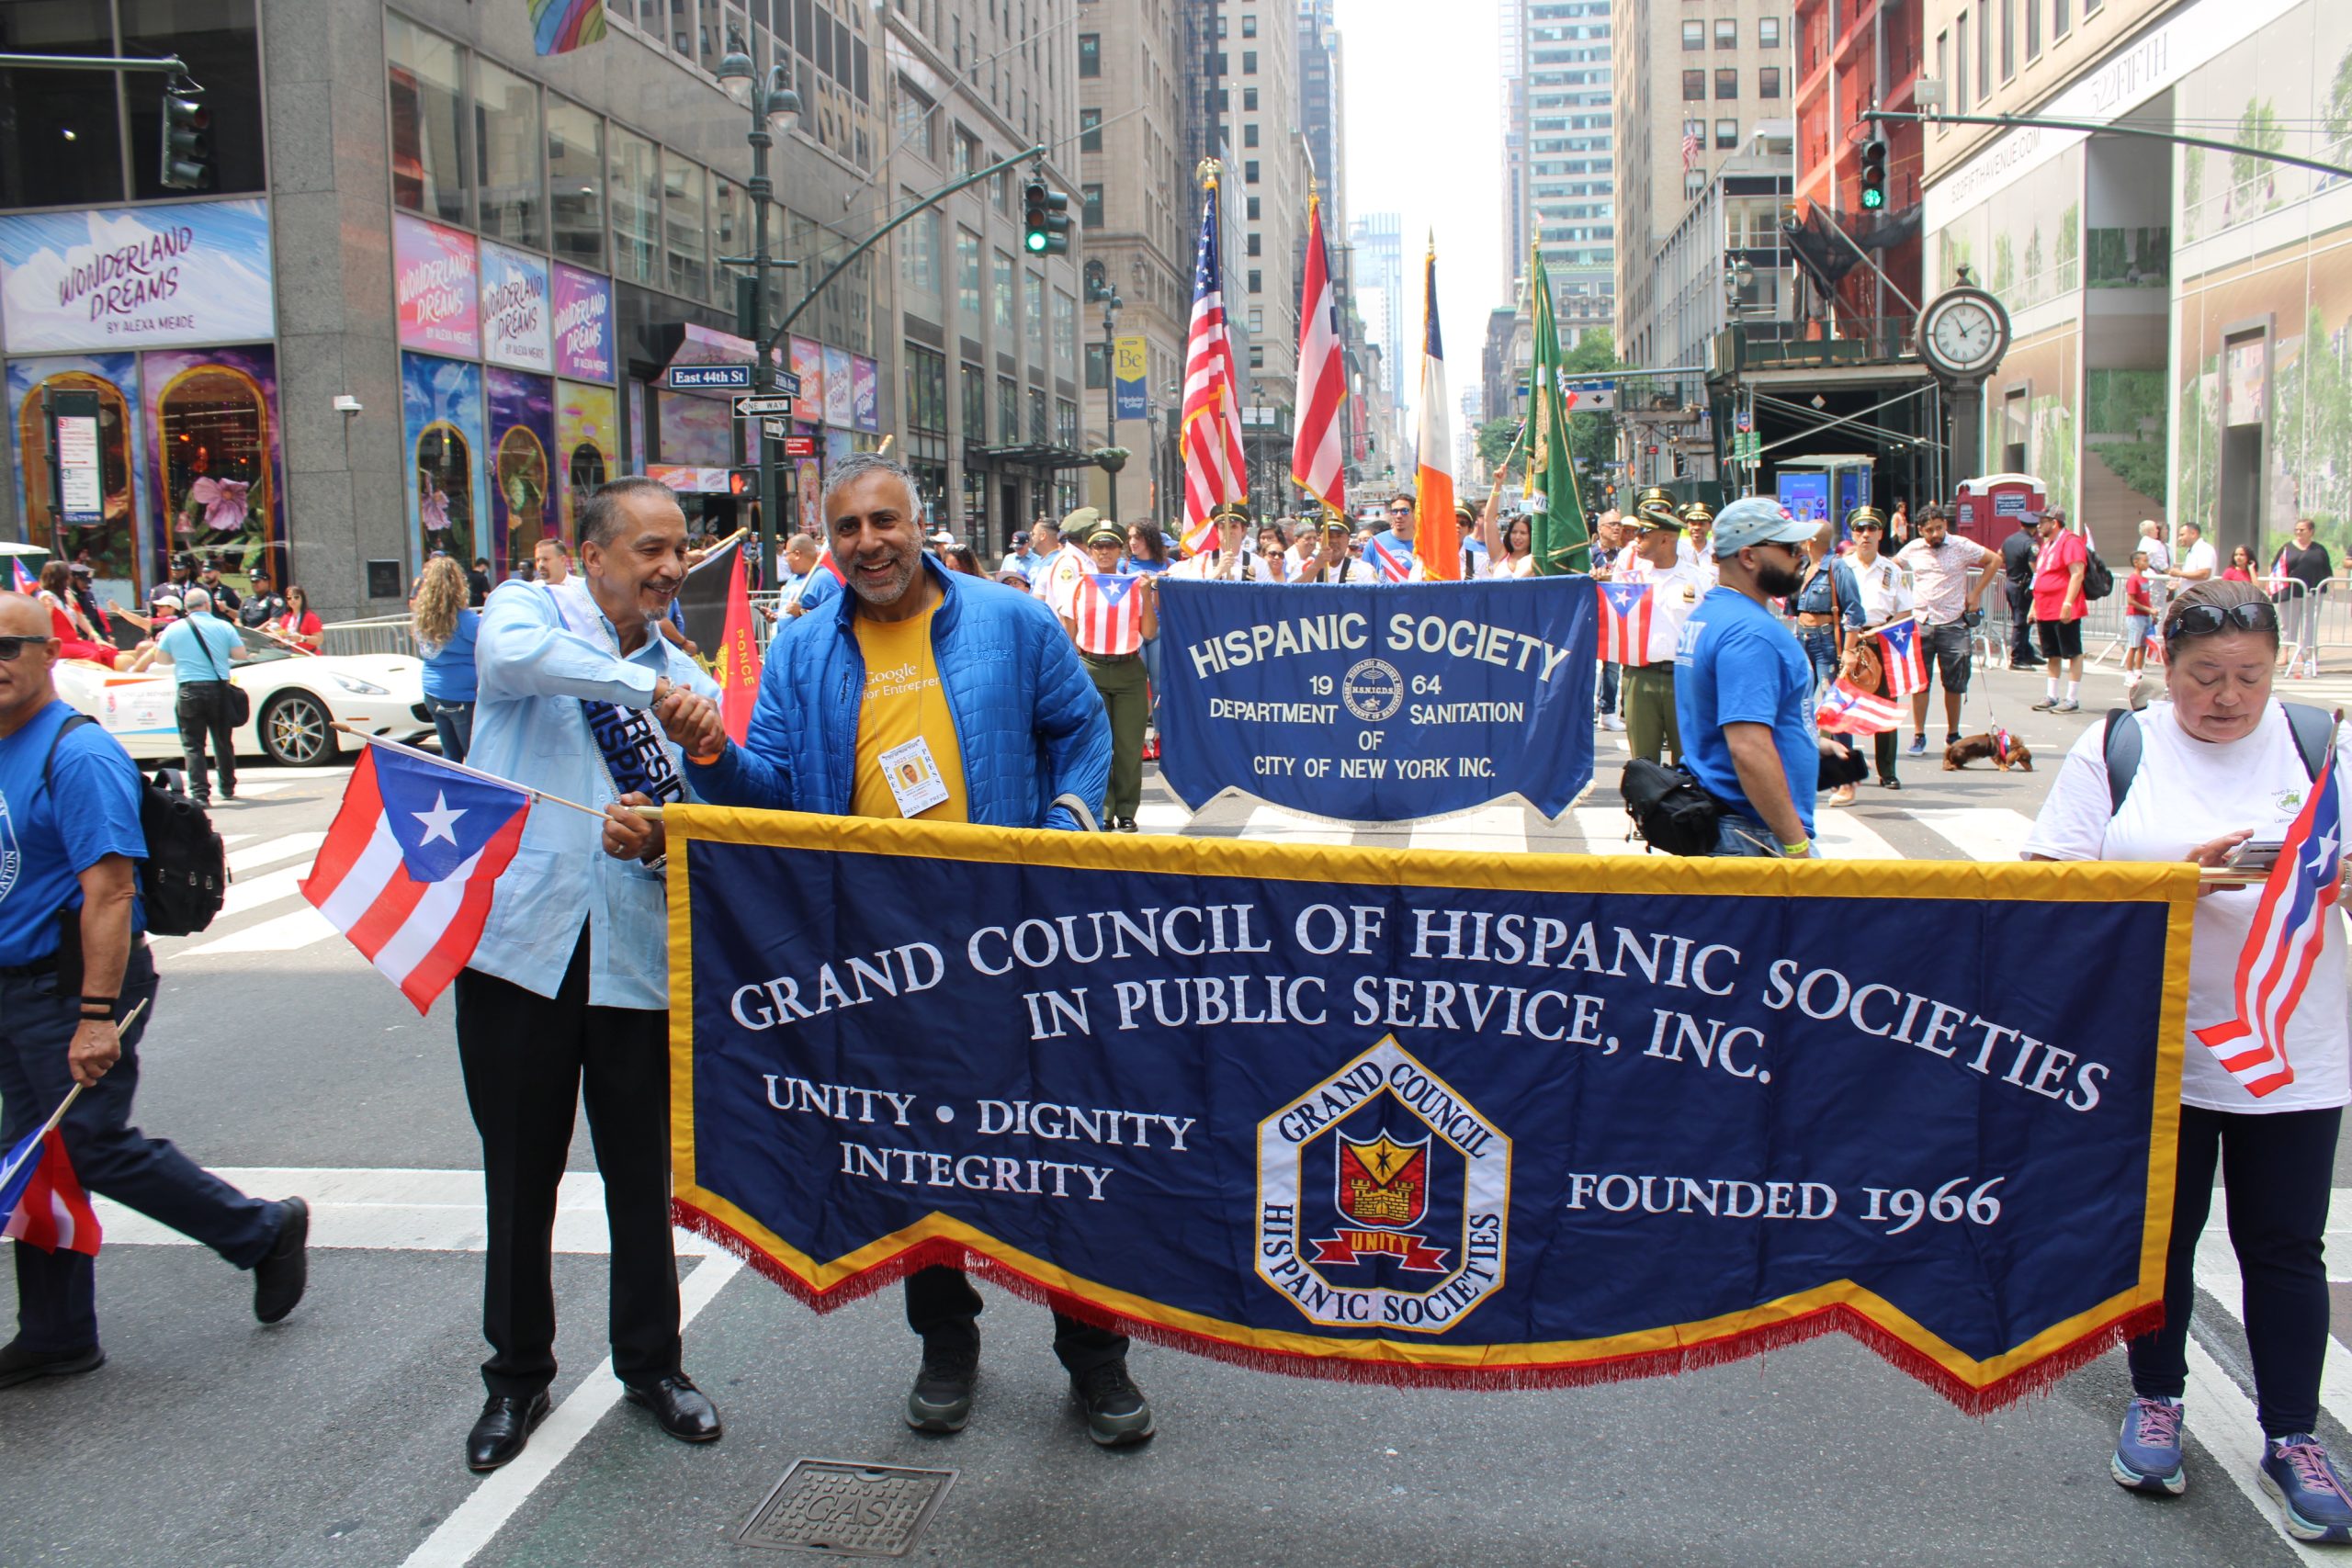 Dr Adal marching with Danny Camancho of Grand Council of Hispanic Societies in Public SVC Inc